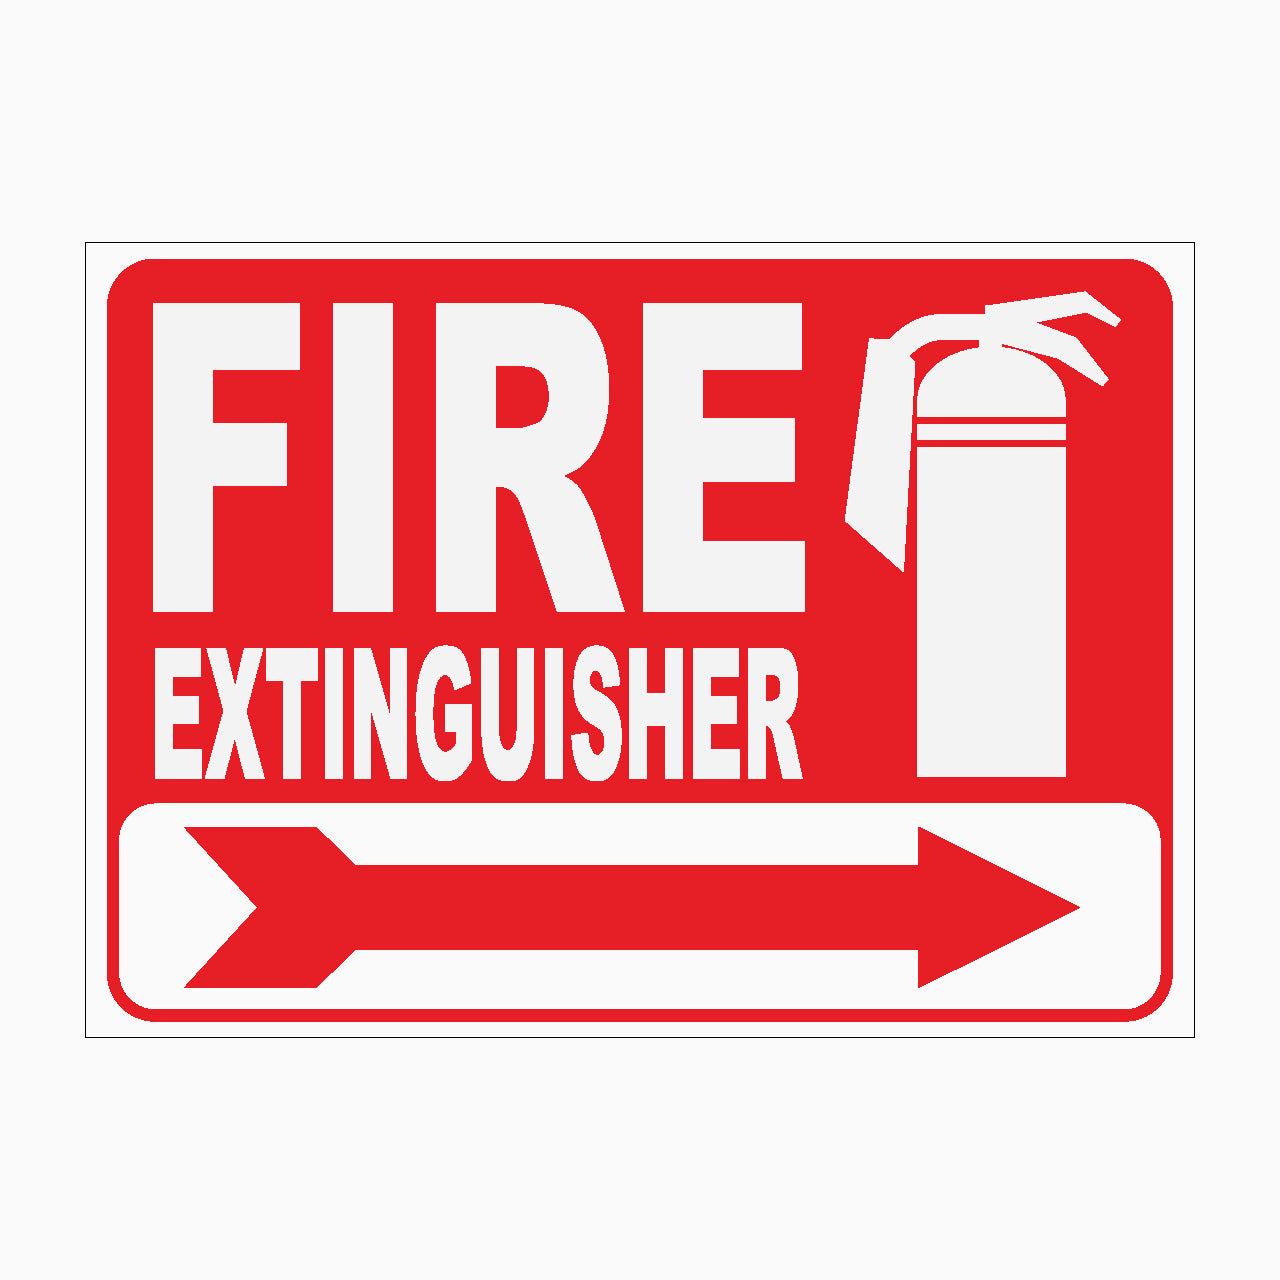 FIRE EXTINGUISHER SIGN - RIGHT POINT - GET SIGNS